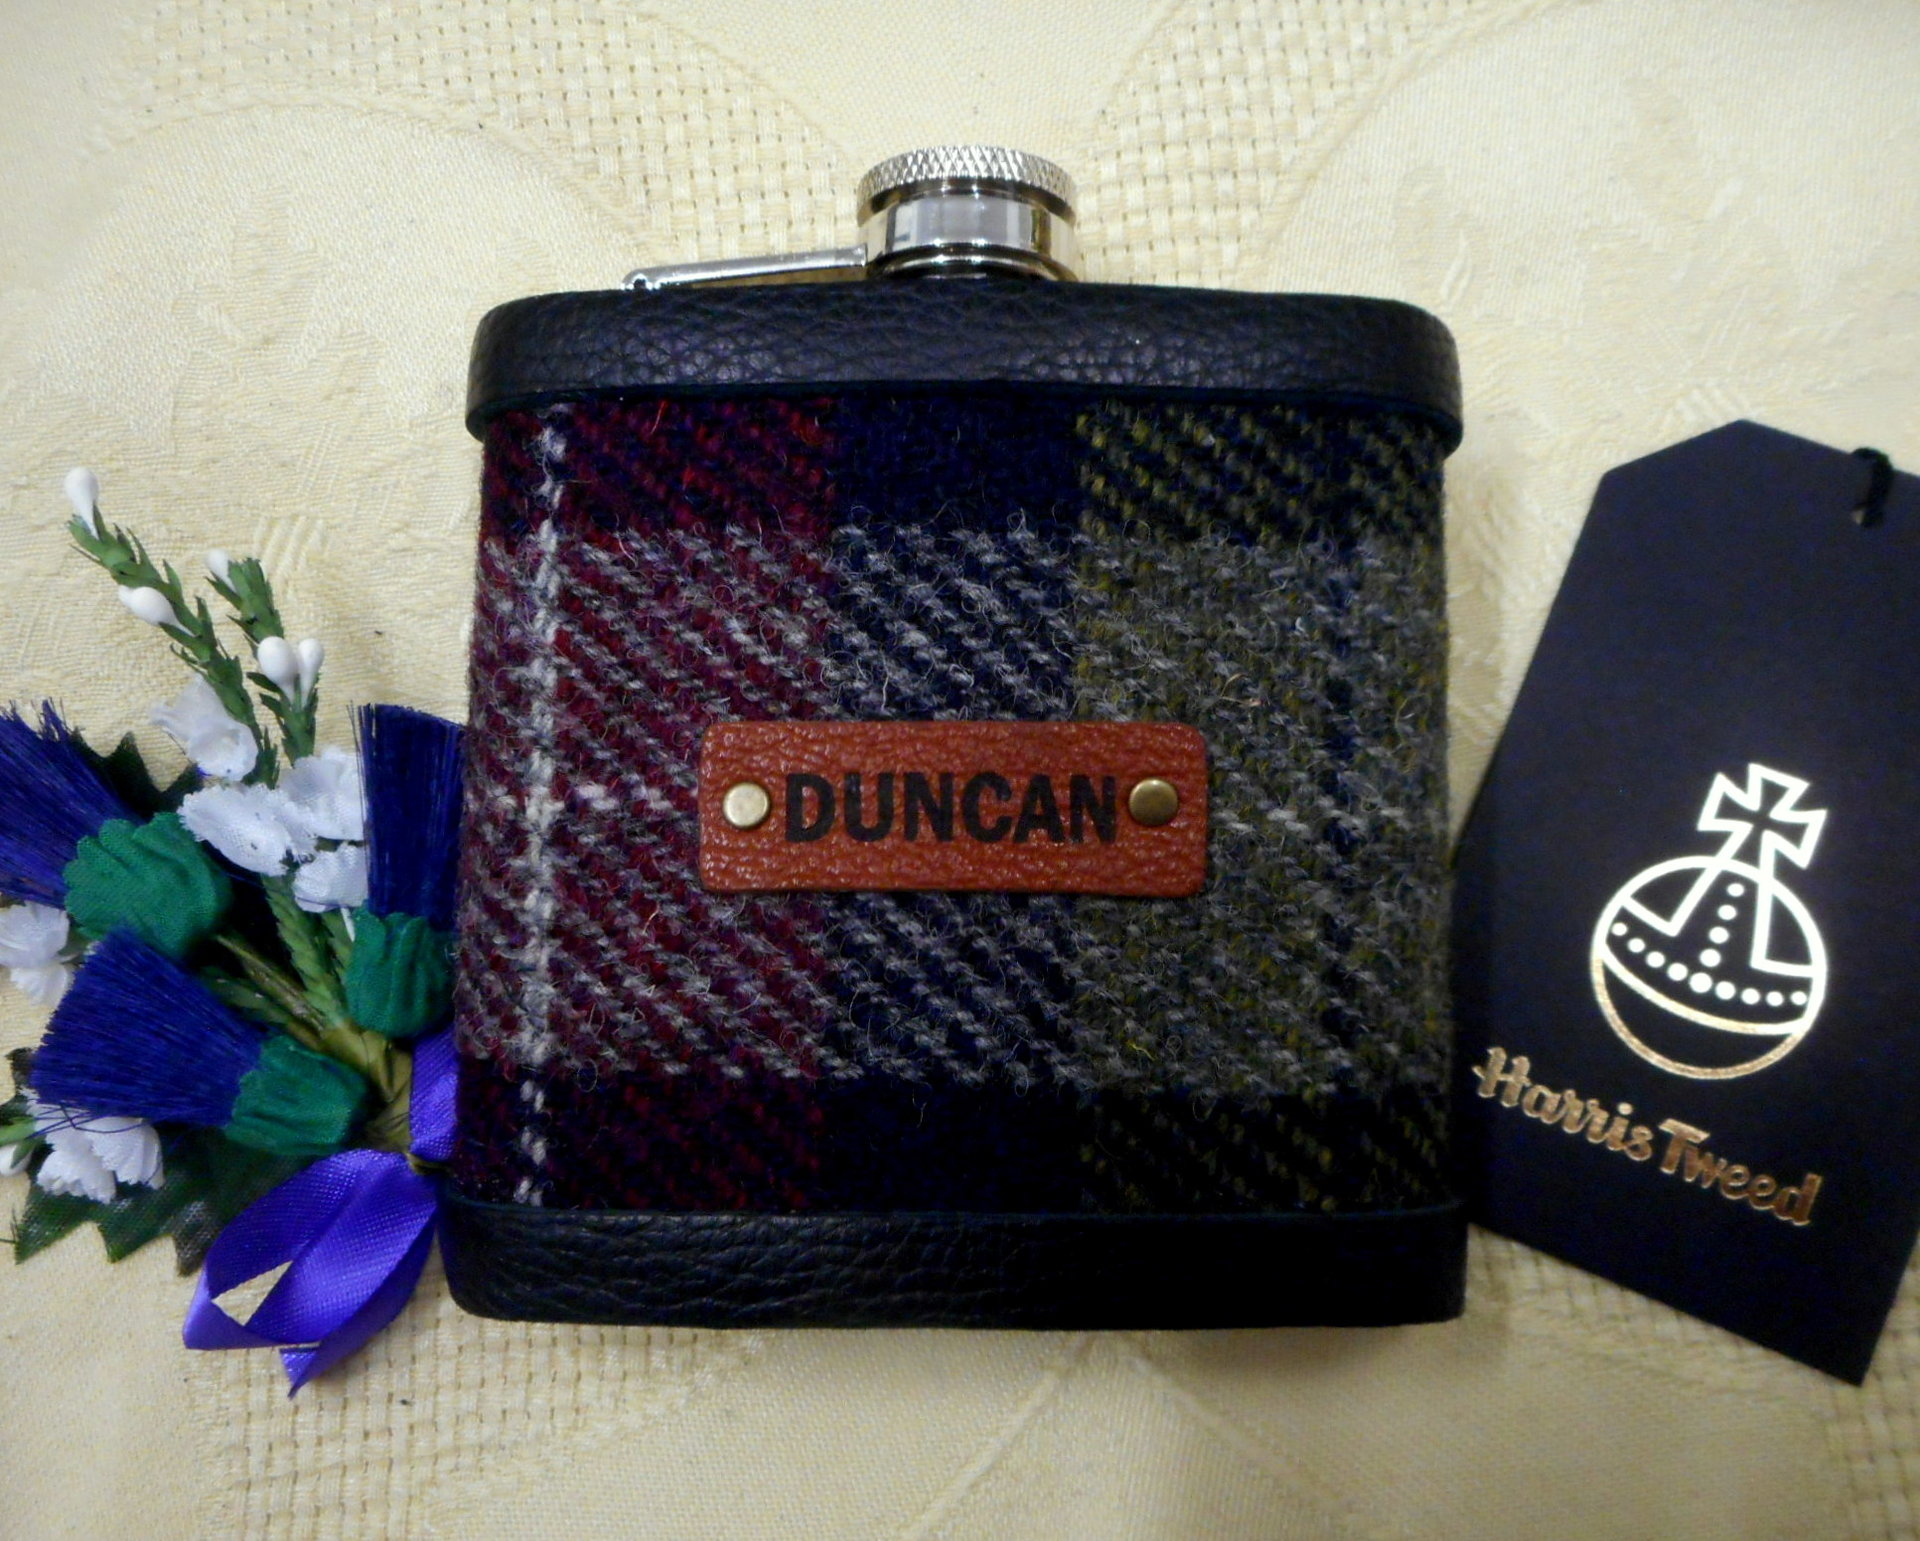 Personalised Groomsman gifts  Harris Tweed hip flasks with individual names on leather labels Scottish luxury gift for wedding  Best Man, Usher, Father of Bride or groom, choice of tweeds.